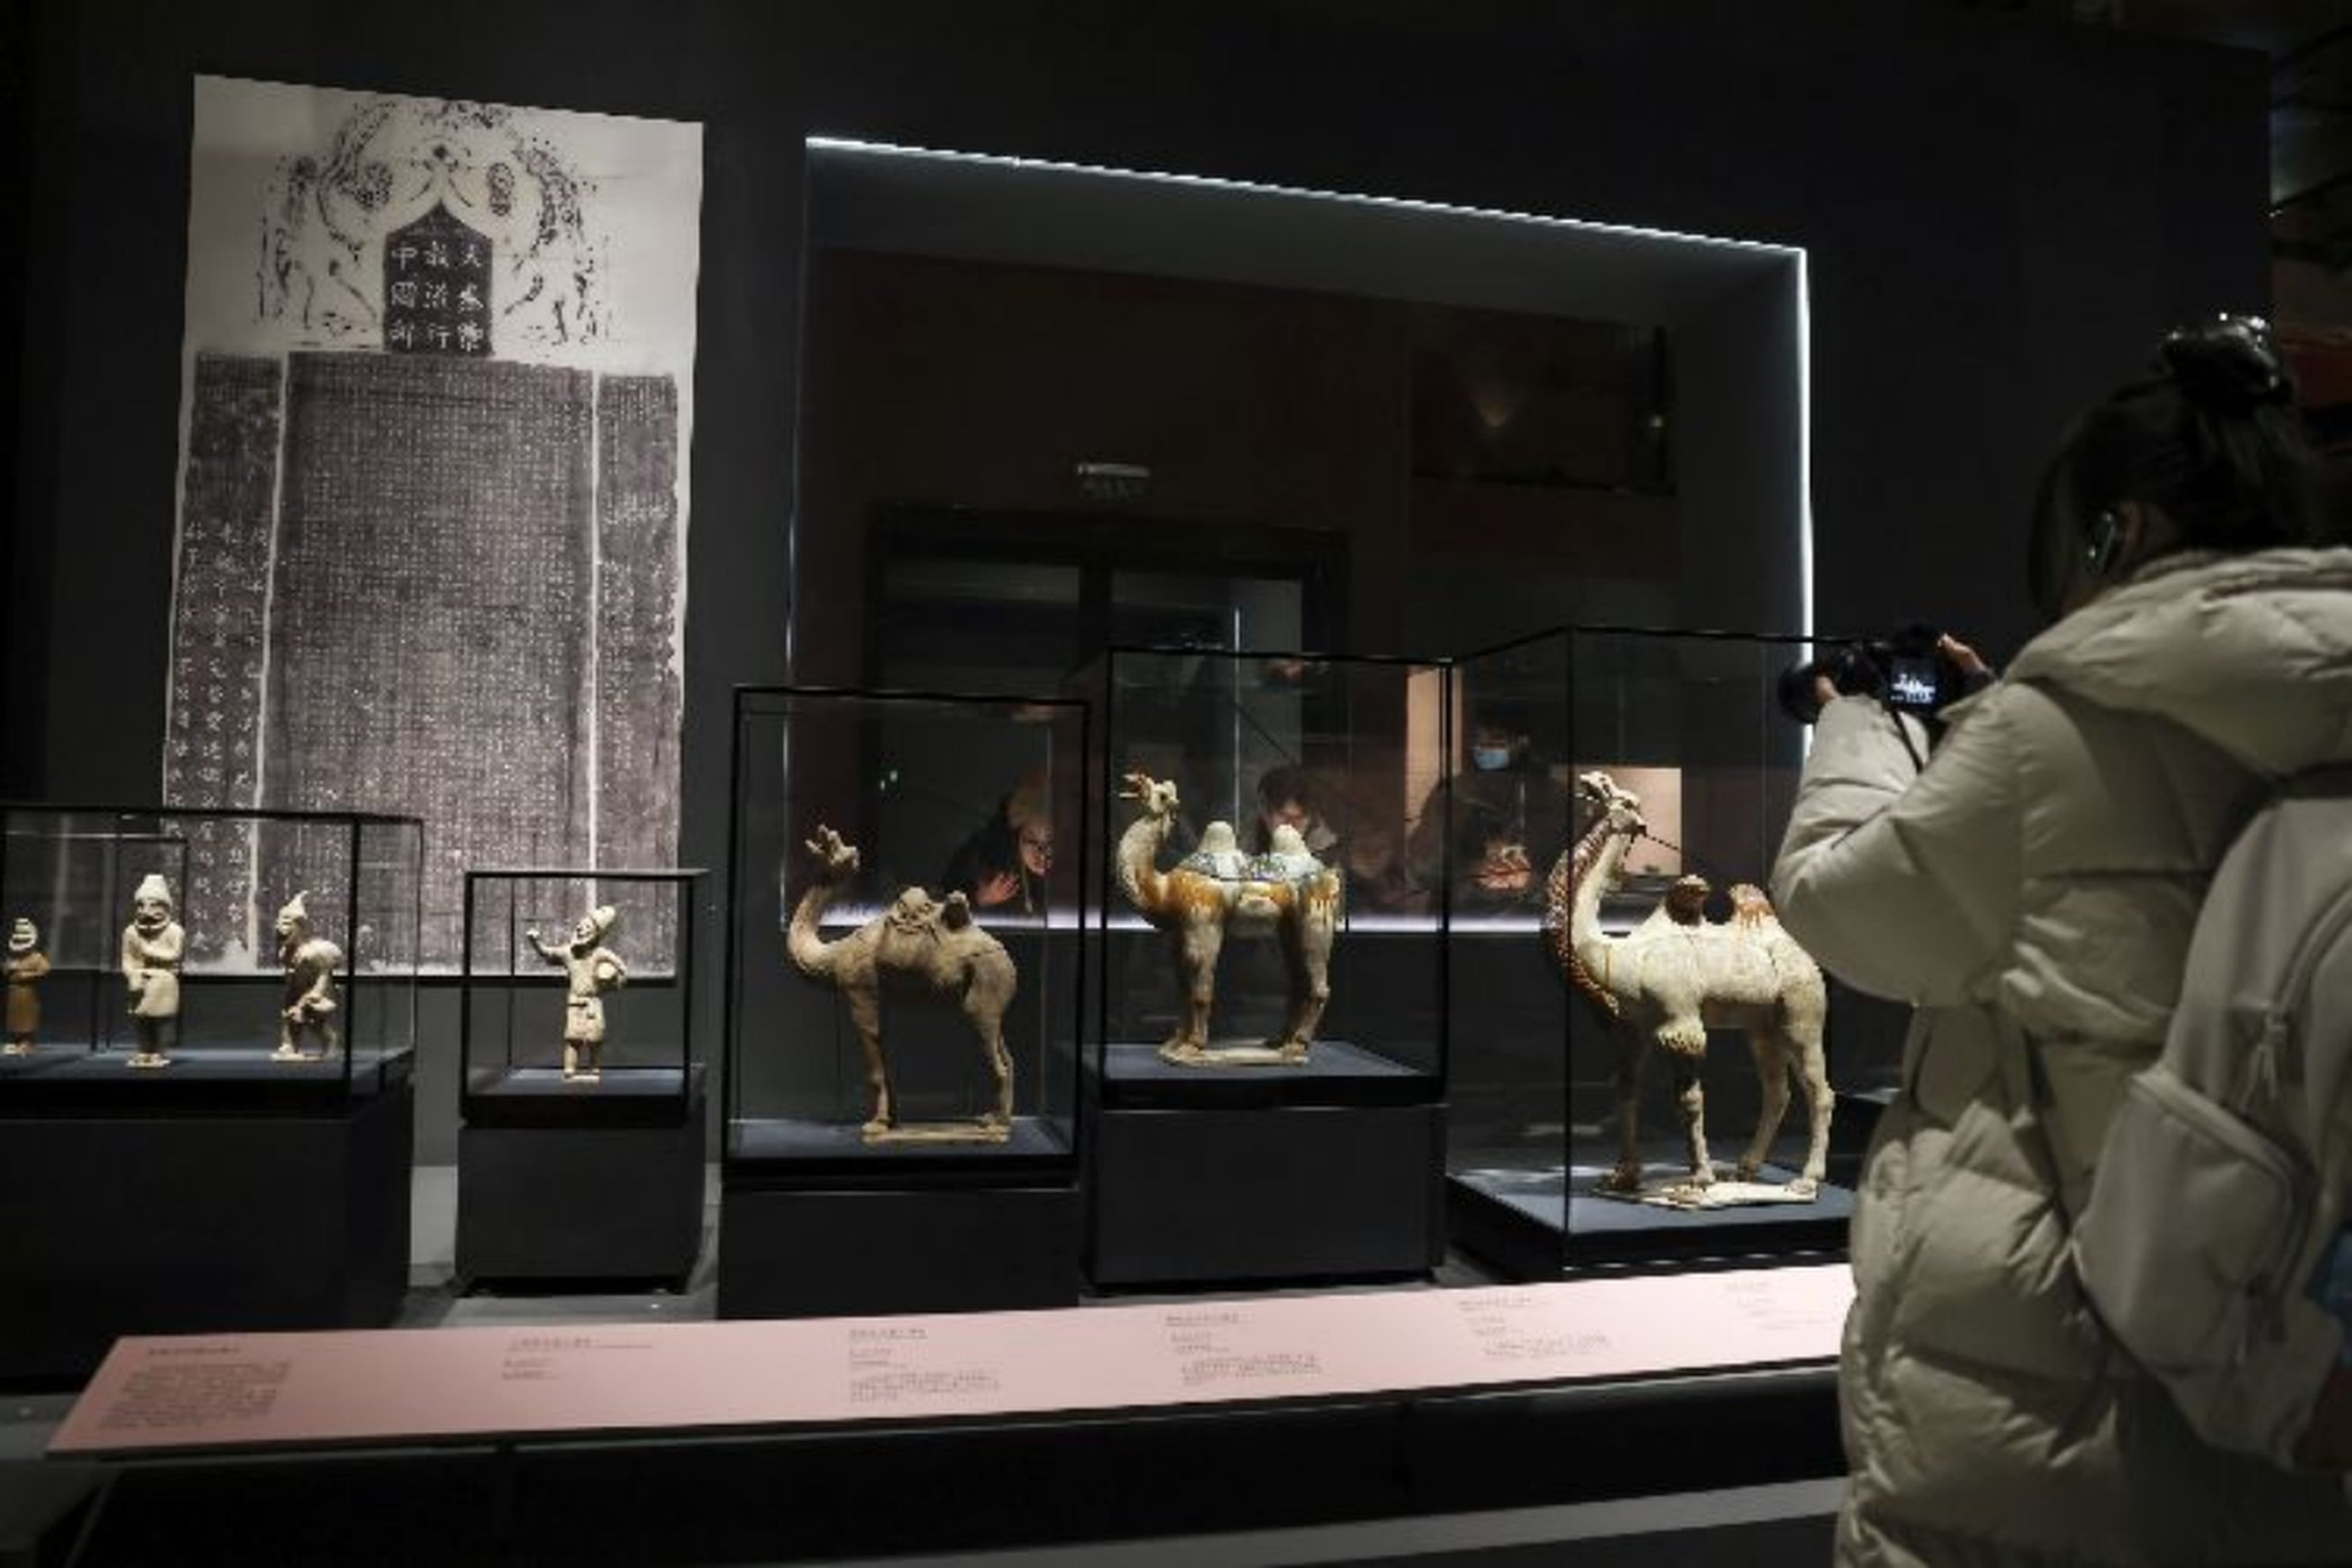 Ancient relics from Iran and Saudi Arabia are on display at the Palace Museum in China as part of growing cultural exchanges between countries of the Global South, according to observers. Photo: Handout